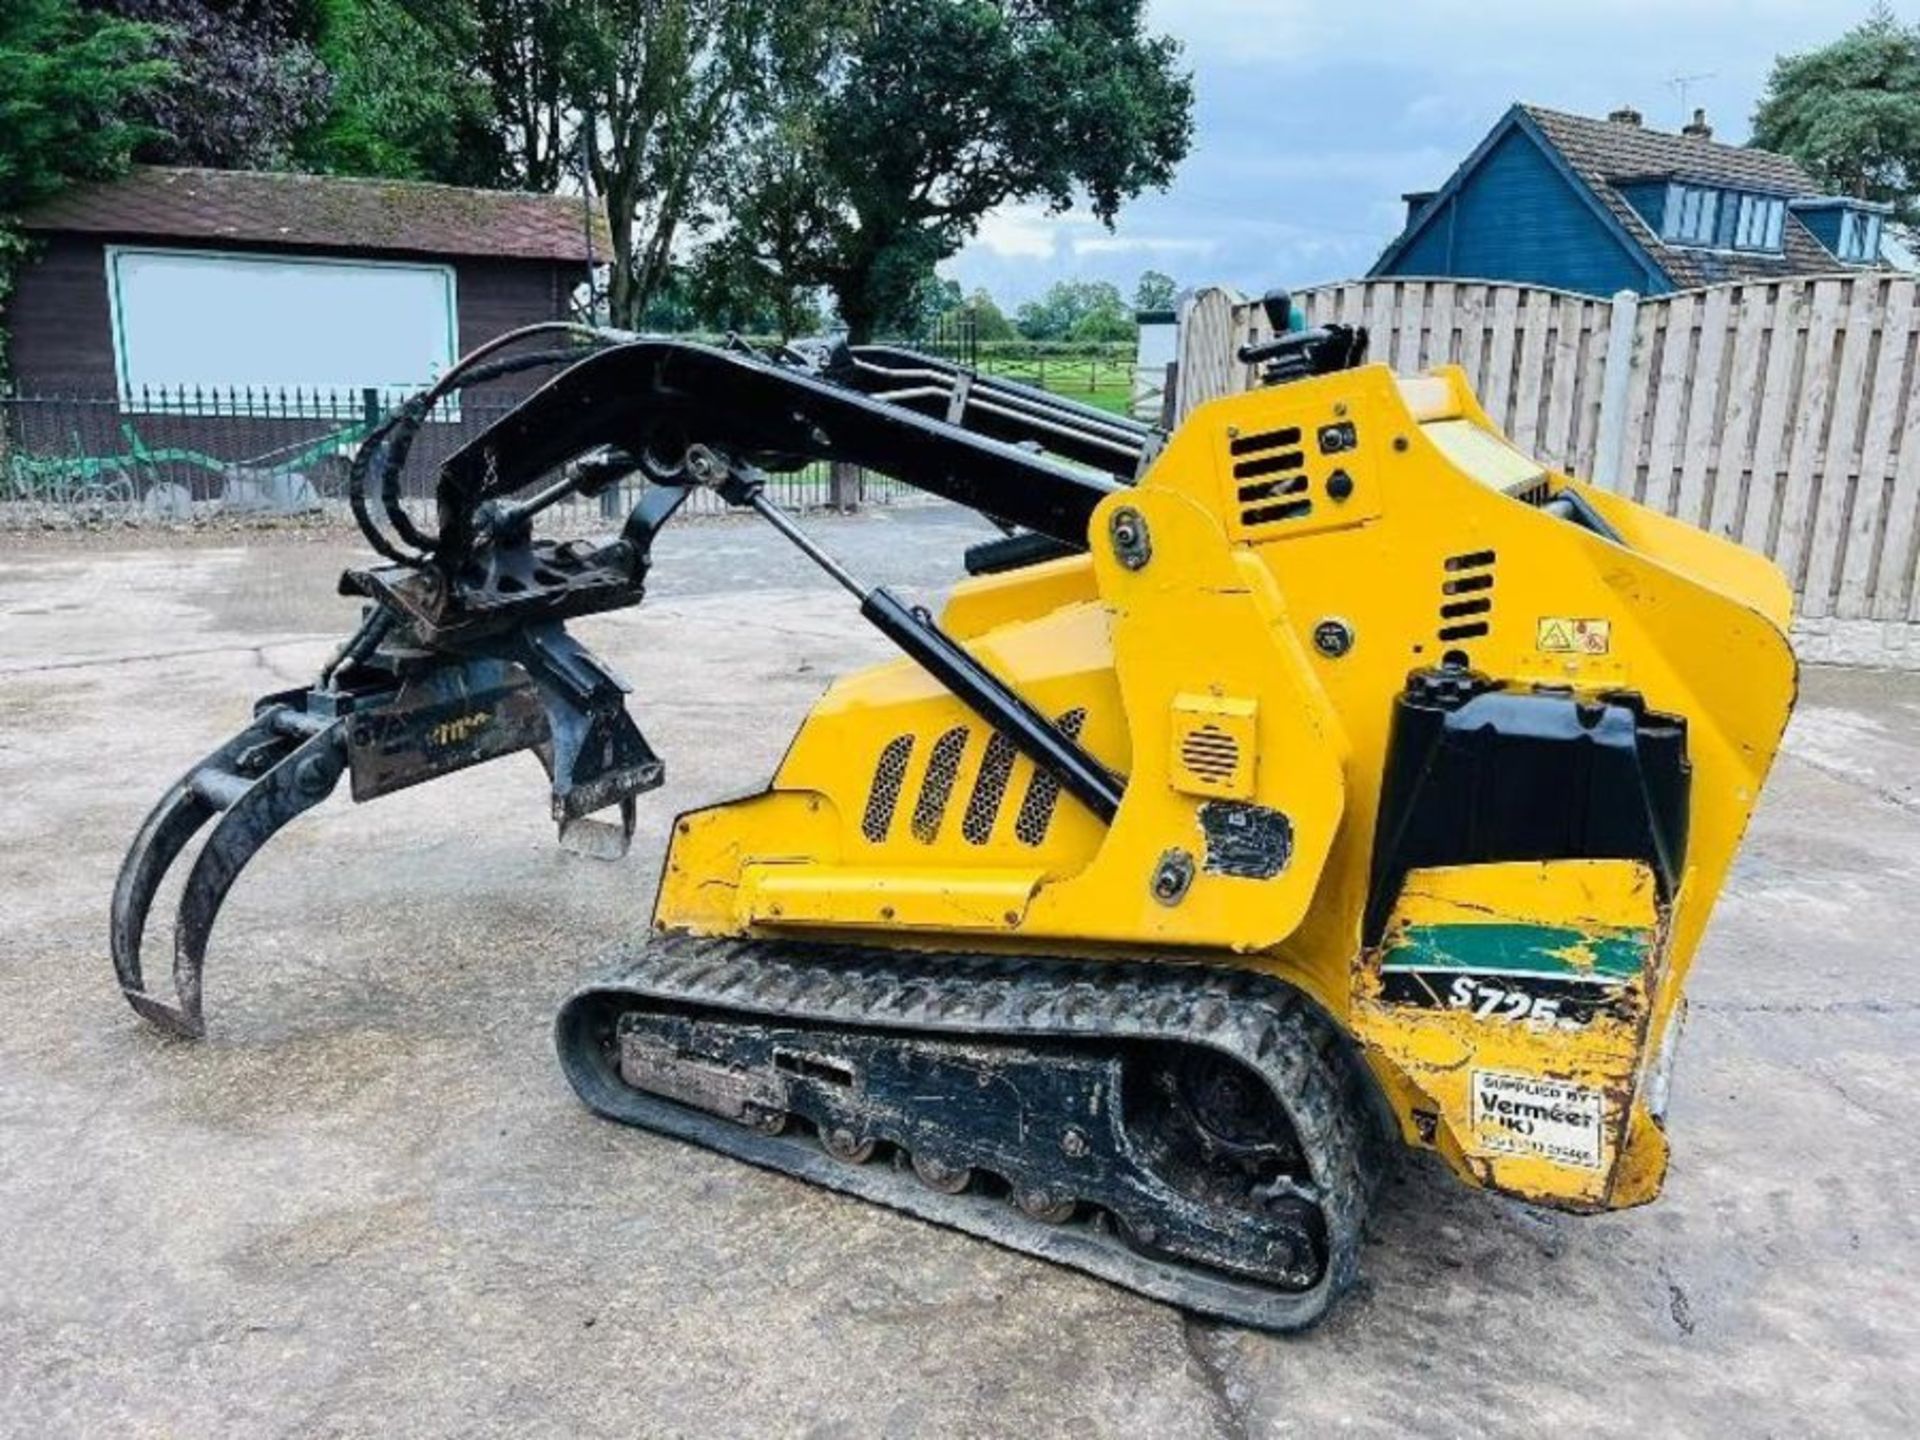 VERMEER S725TX MINI COMPACT TRACKED LOADER *YEAR 2 - Image 3 of 18